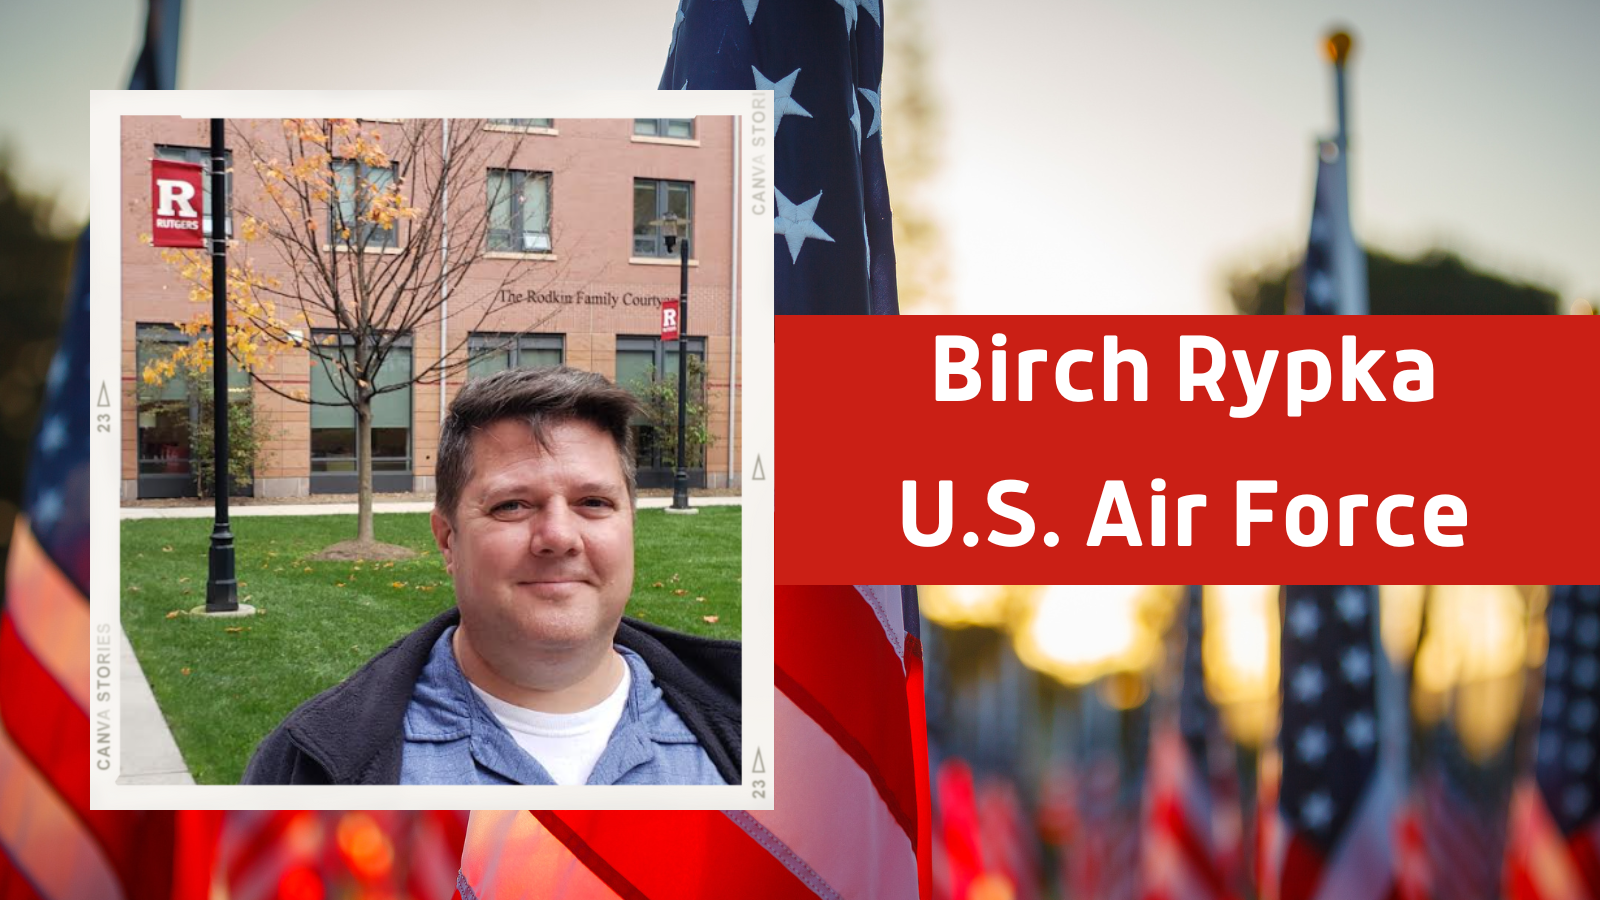 U.S. flags in background with a headshot of a man standing in front of a Rutgers University building